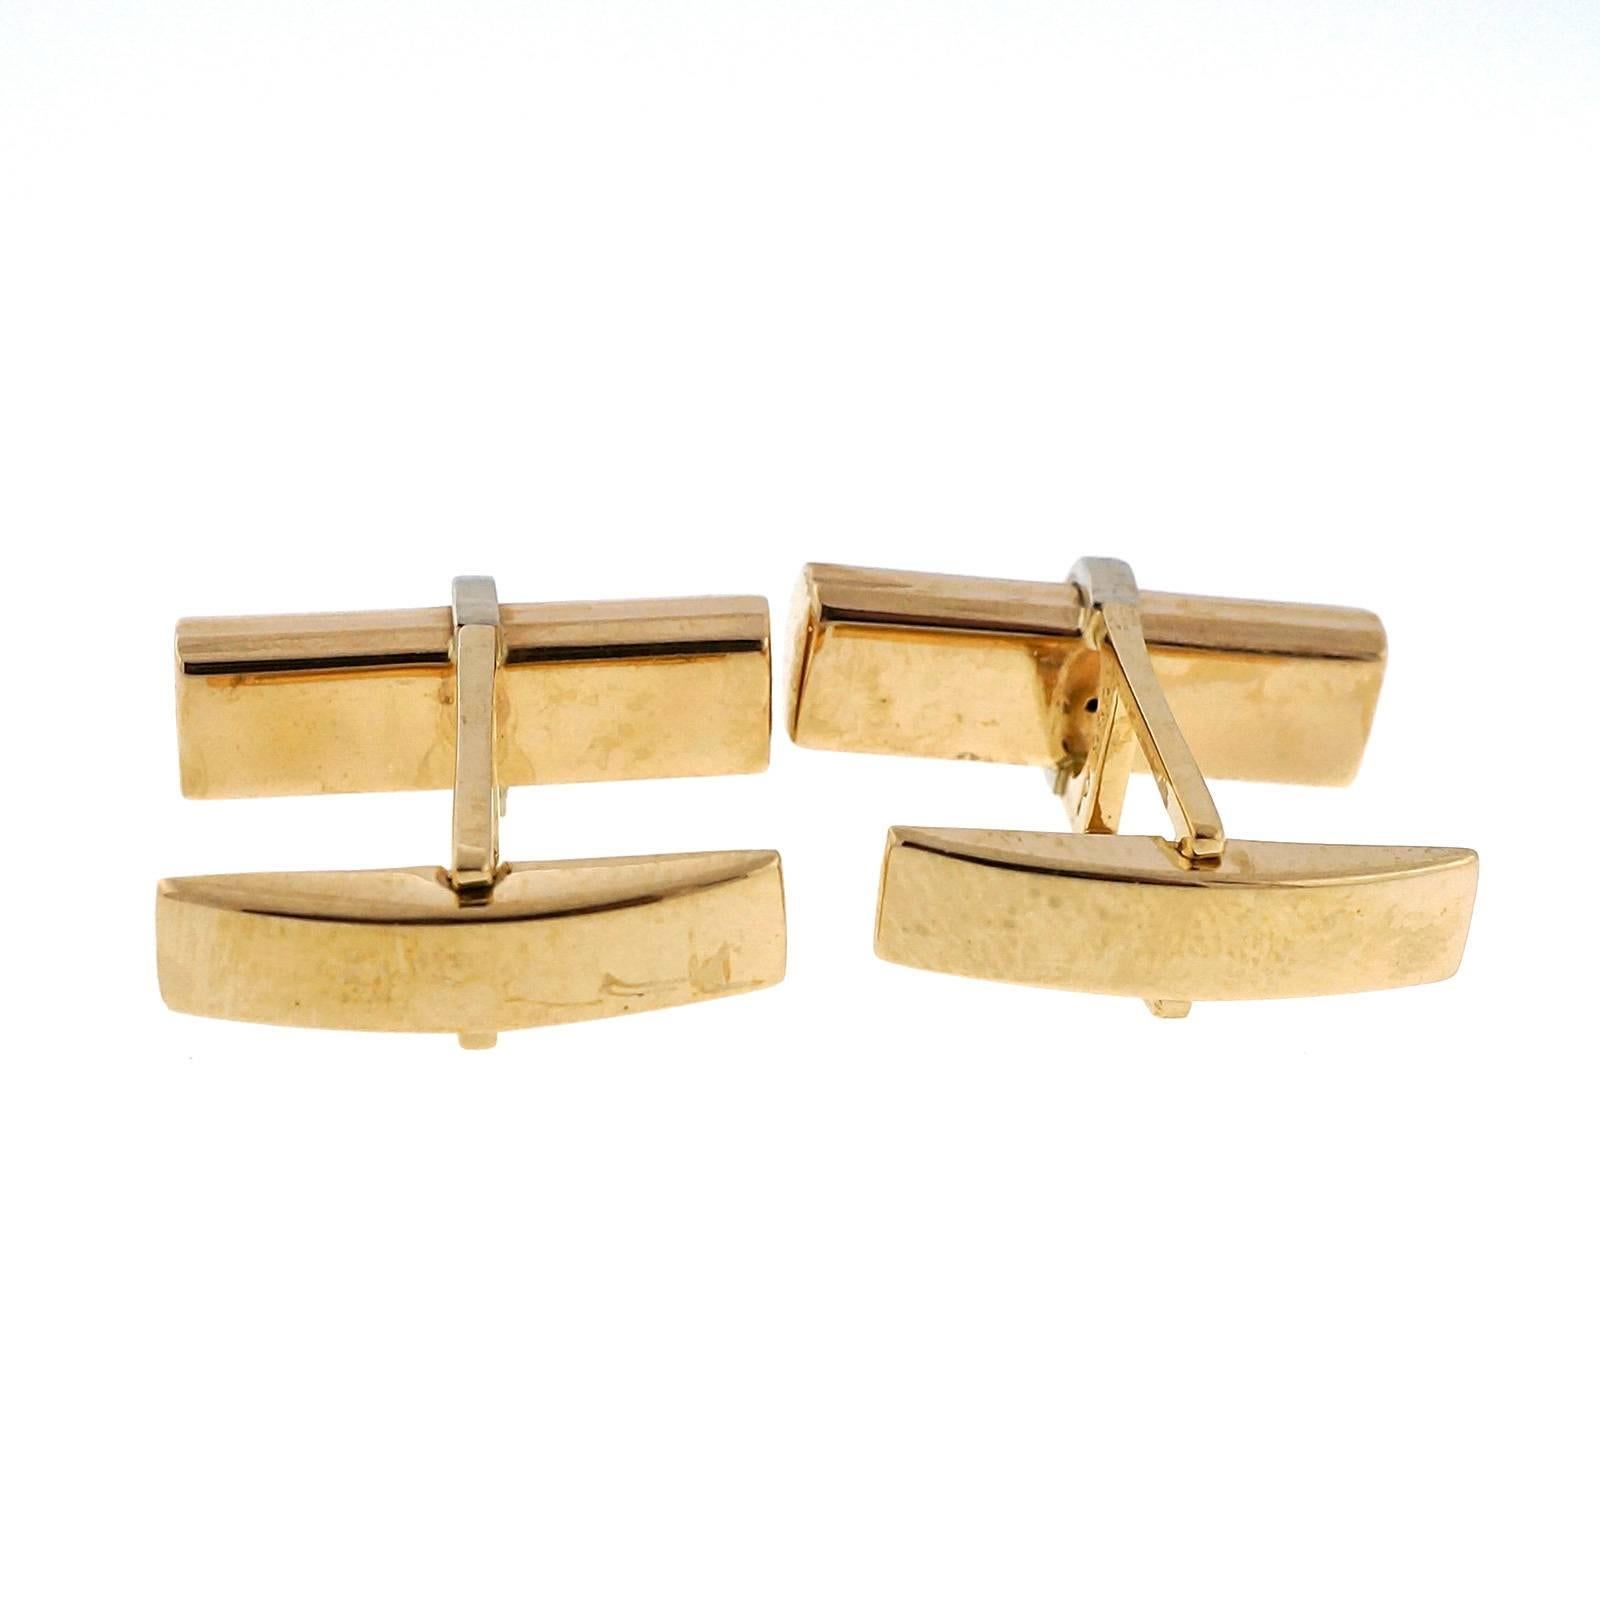 1950 to 1959 Larter & Sons 14k yellow gold ribbed cylinder cuff links with a white gold bar that holds the cylinder.

14k Yellow and white gold
Brand: Larter & Sons
Top to bottom: 8.46mm or .33 inch
Width: 20.83mm or .82 inch
Depth: 5.51mm
10.7